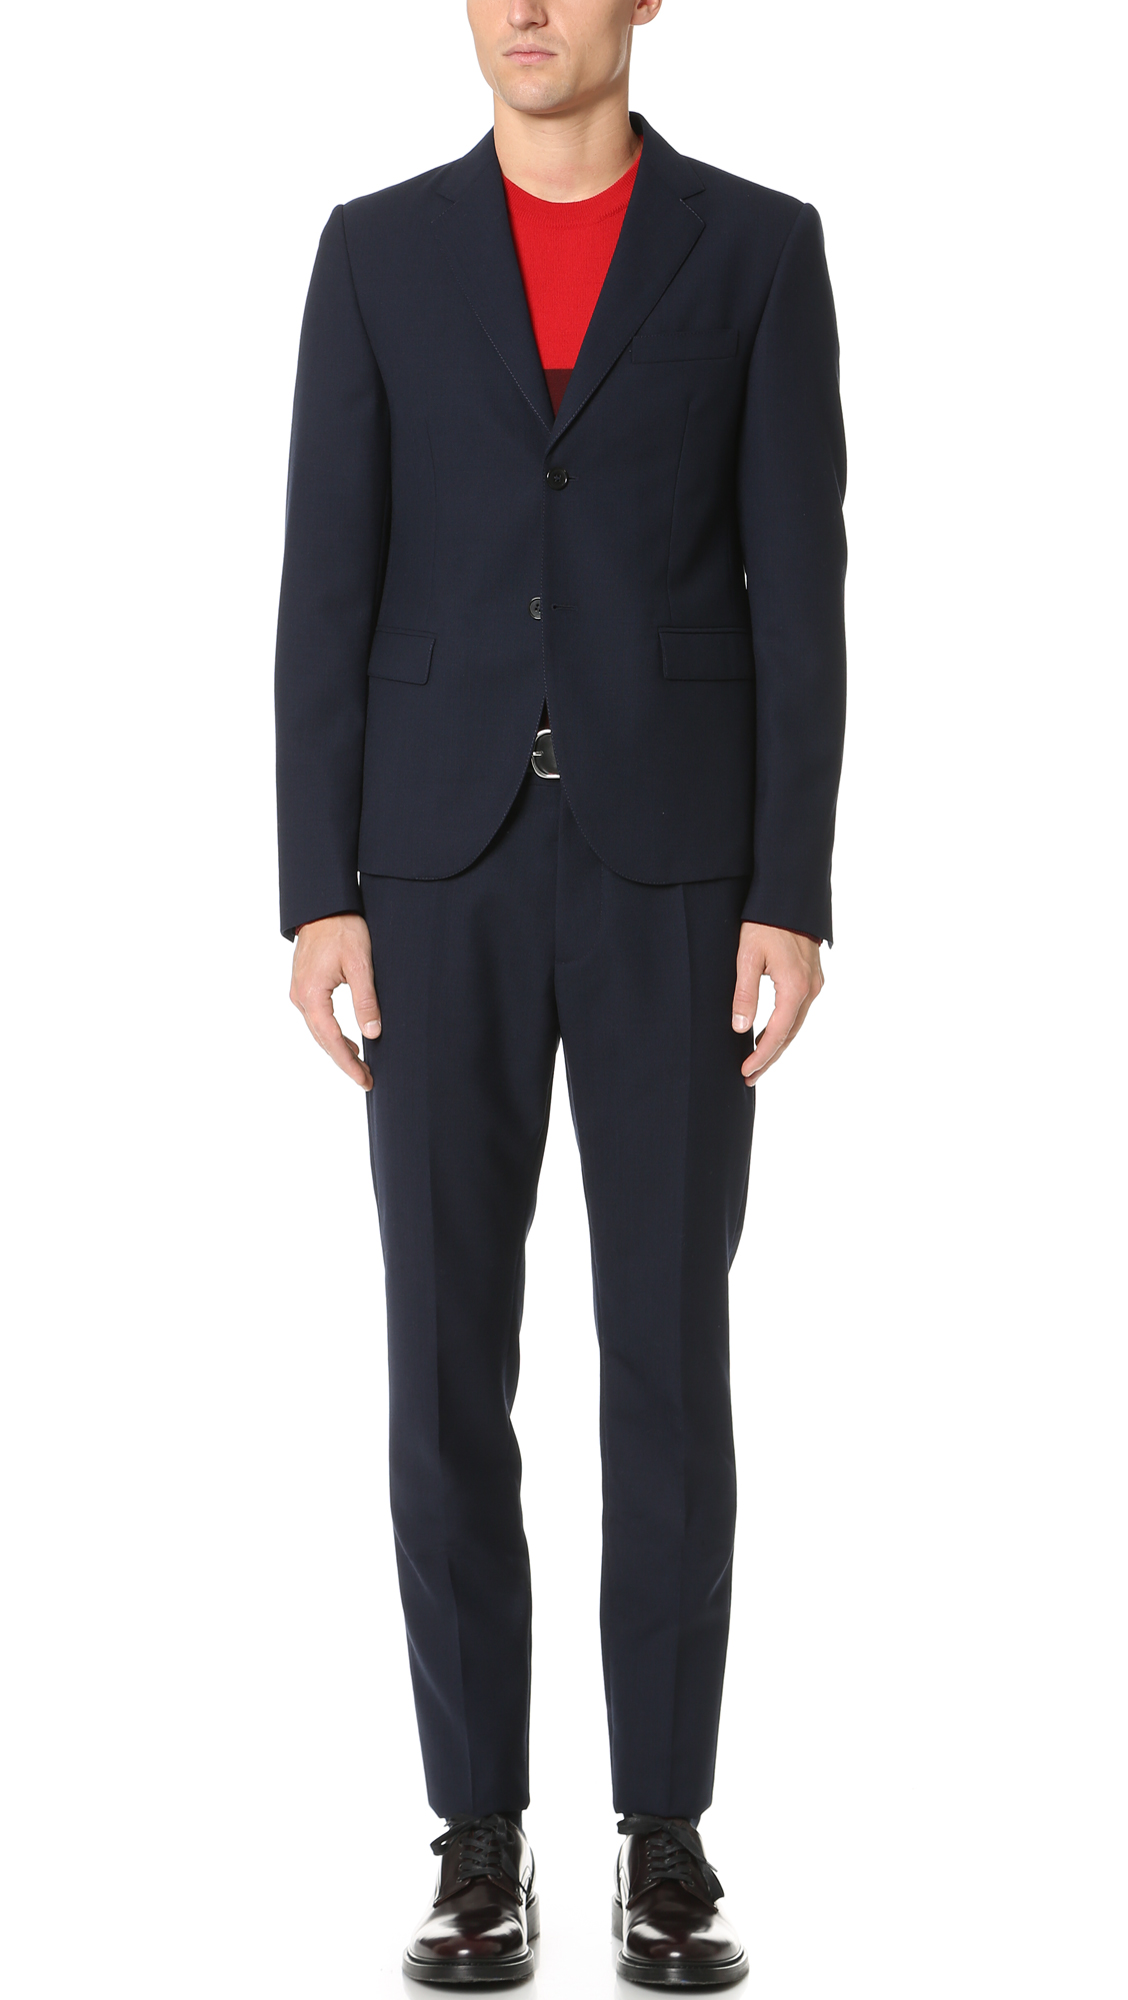 Marni Slim Fit Suit In Navy | ModeSens